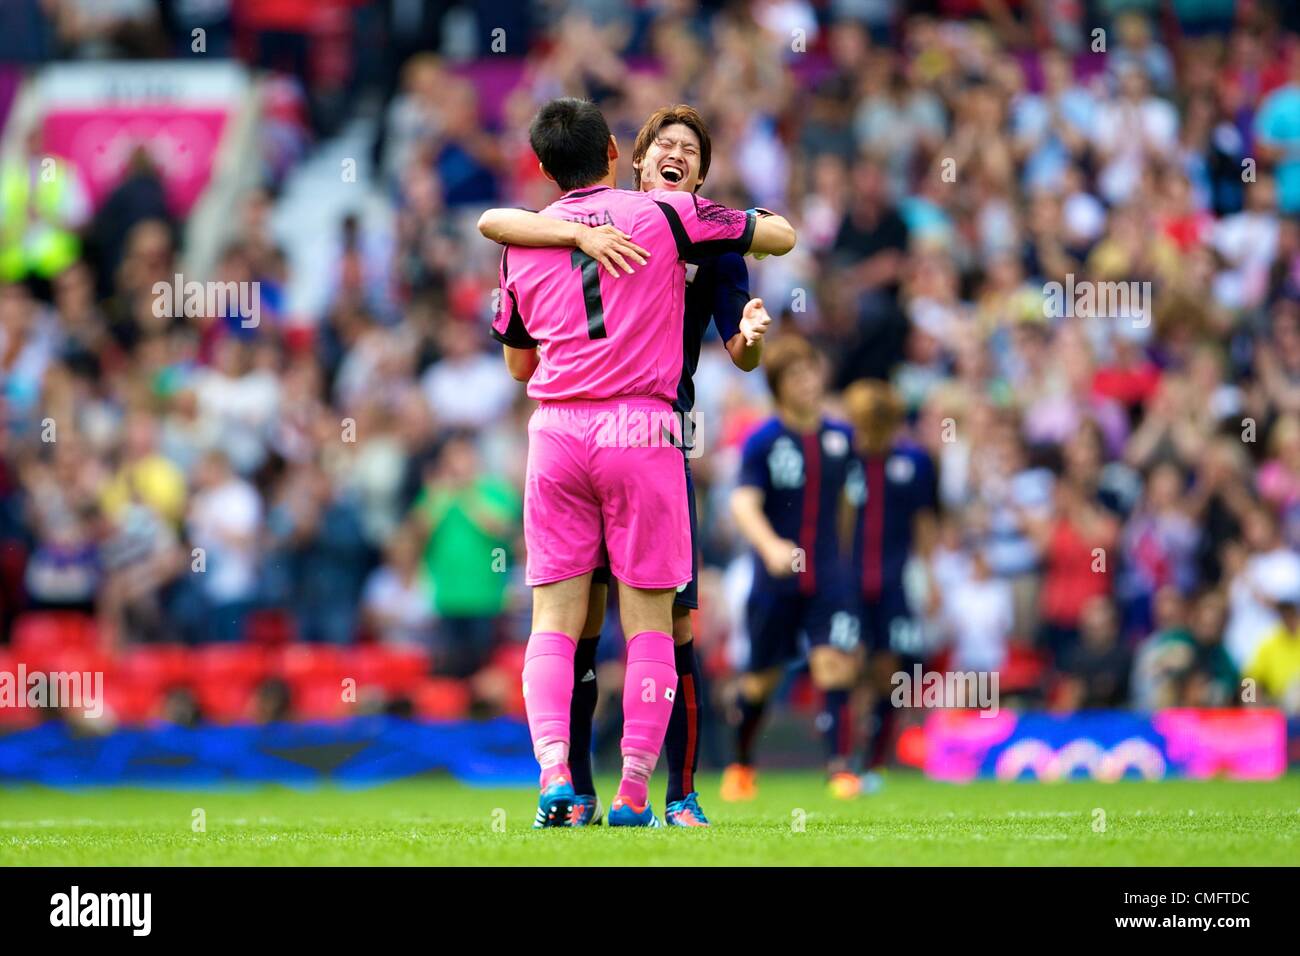 UK. 04.08.2012 Manchester, England. Japan goalkeeper Shuichi Gonda celebrates with team mates after the quarter final match between Japan and Egypt at Old Trafford. Stock Photo